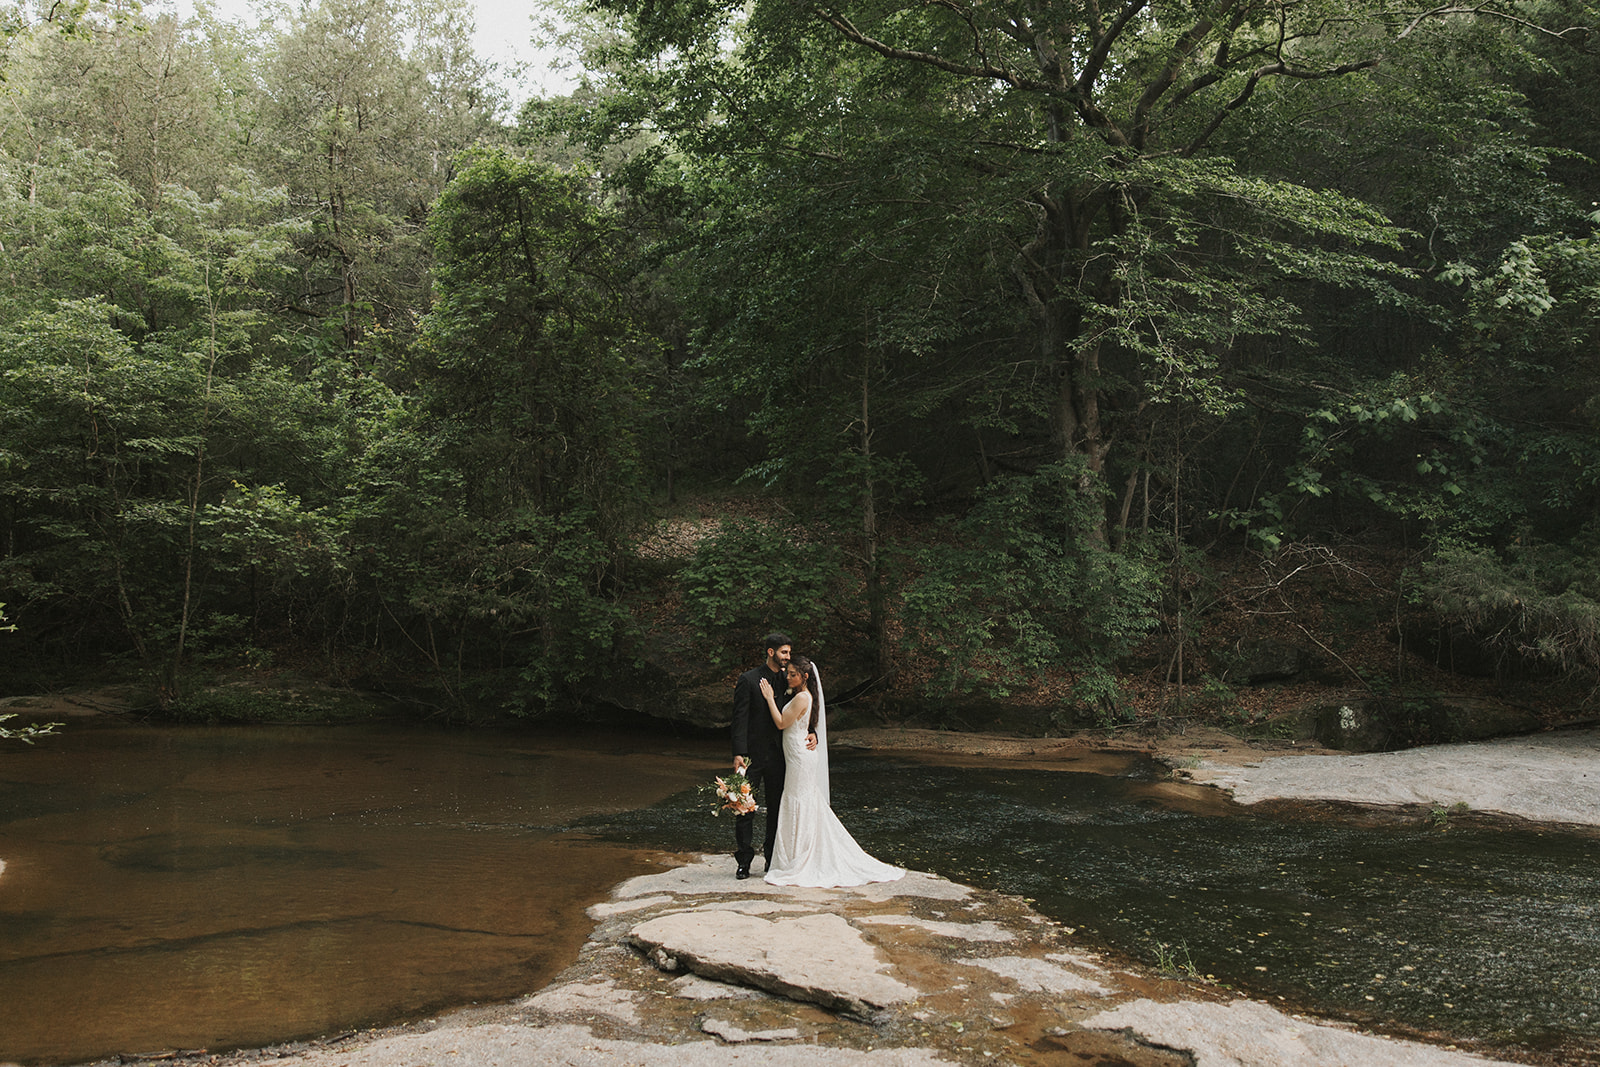 A romantic, classical Southern wedding at the Vesuvius Vineyards in Iron Station, NC